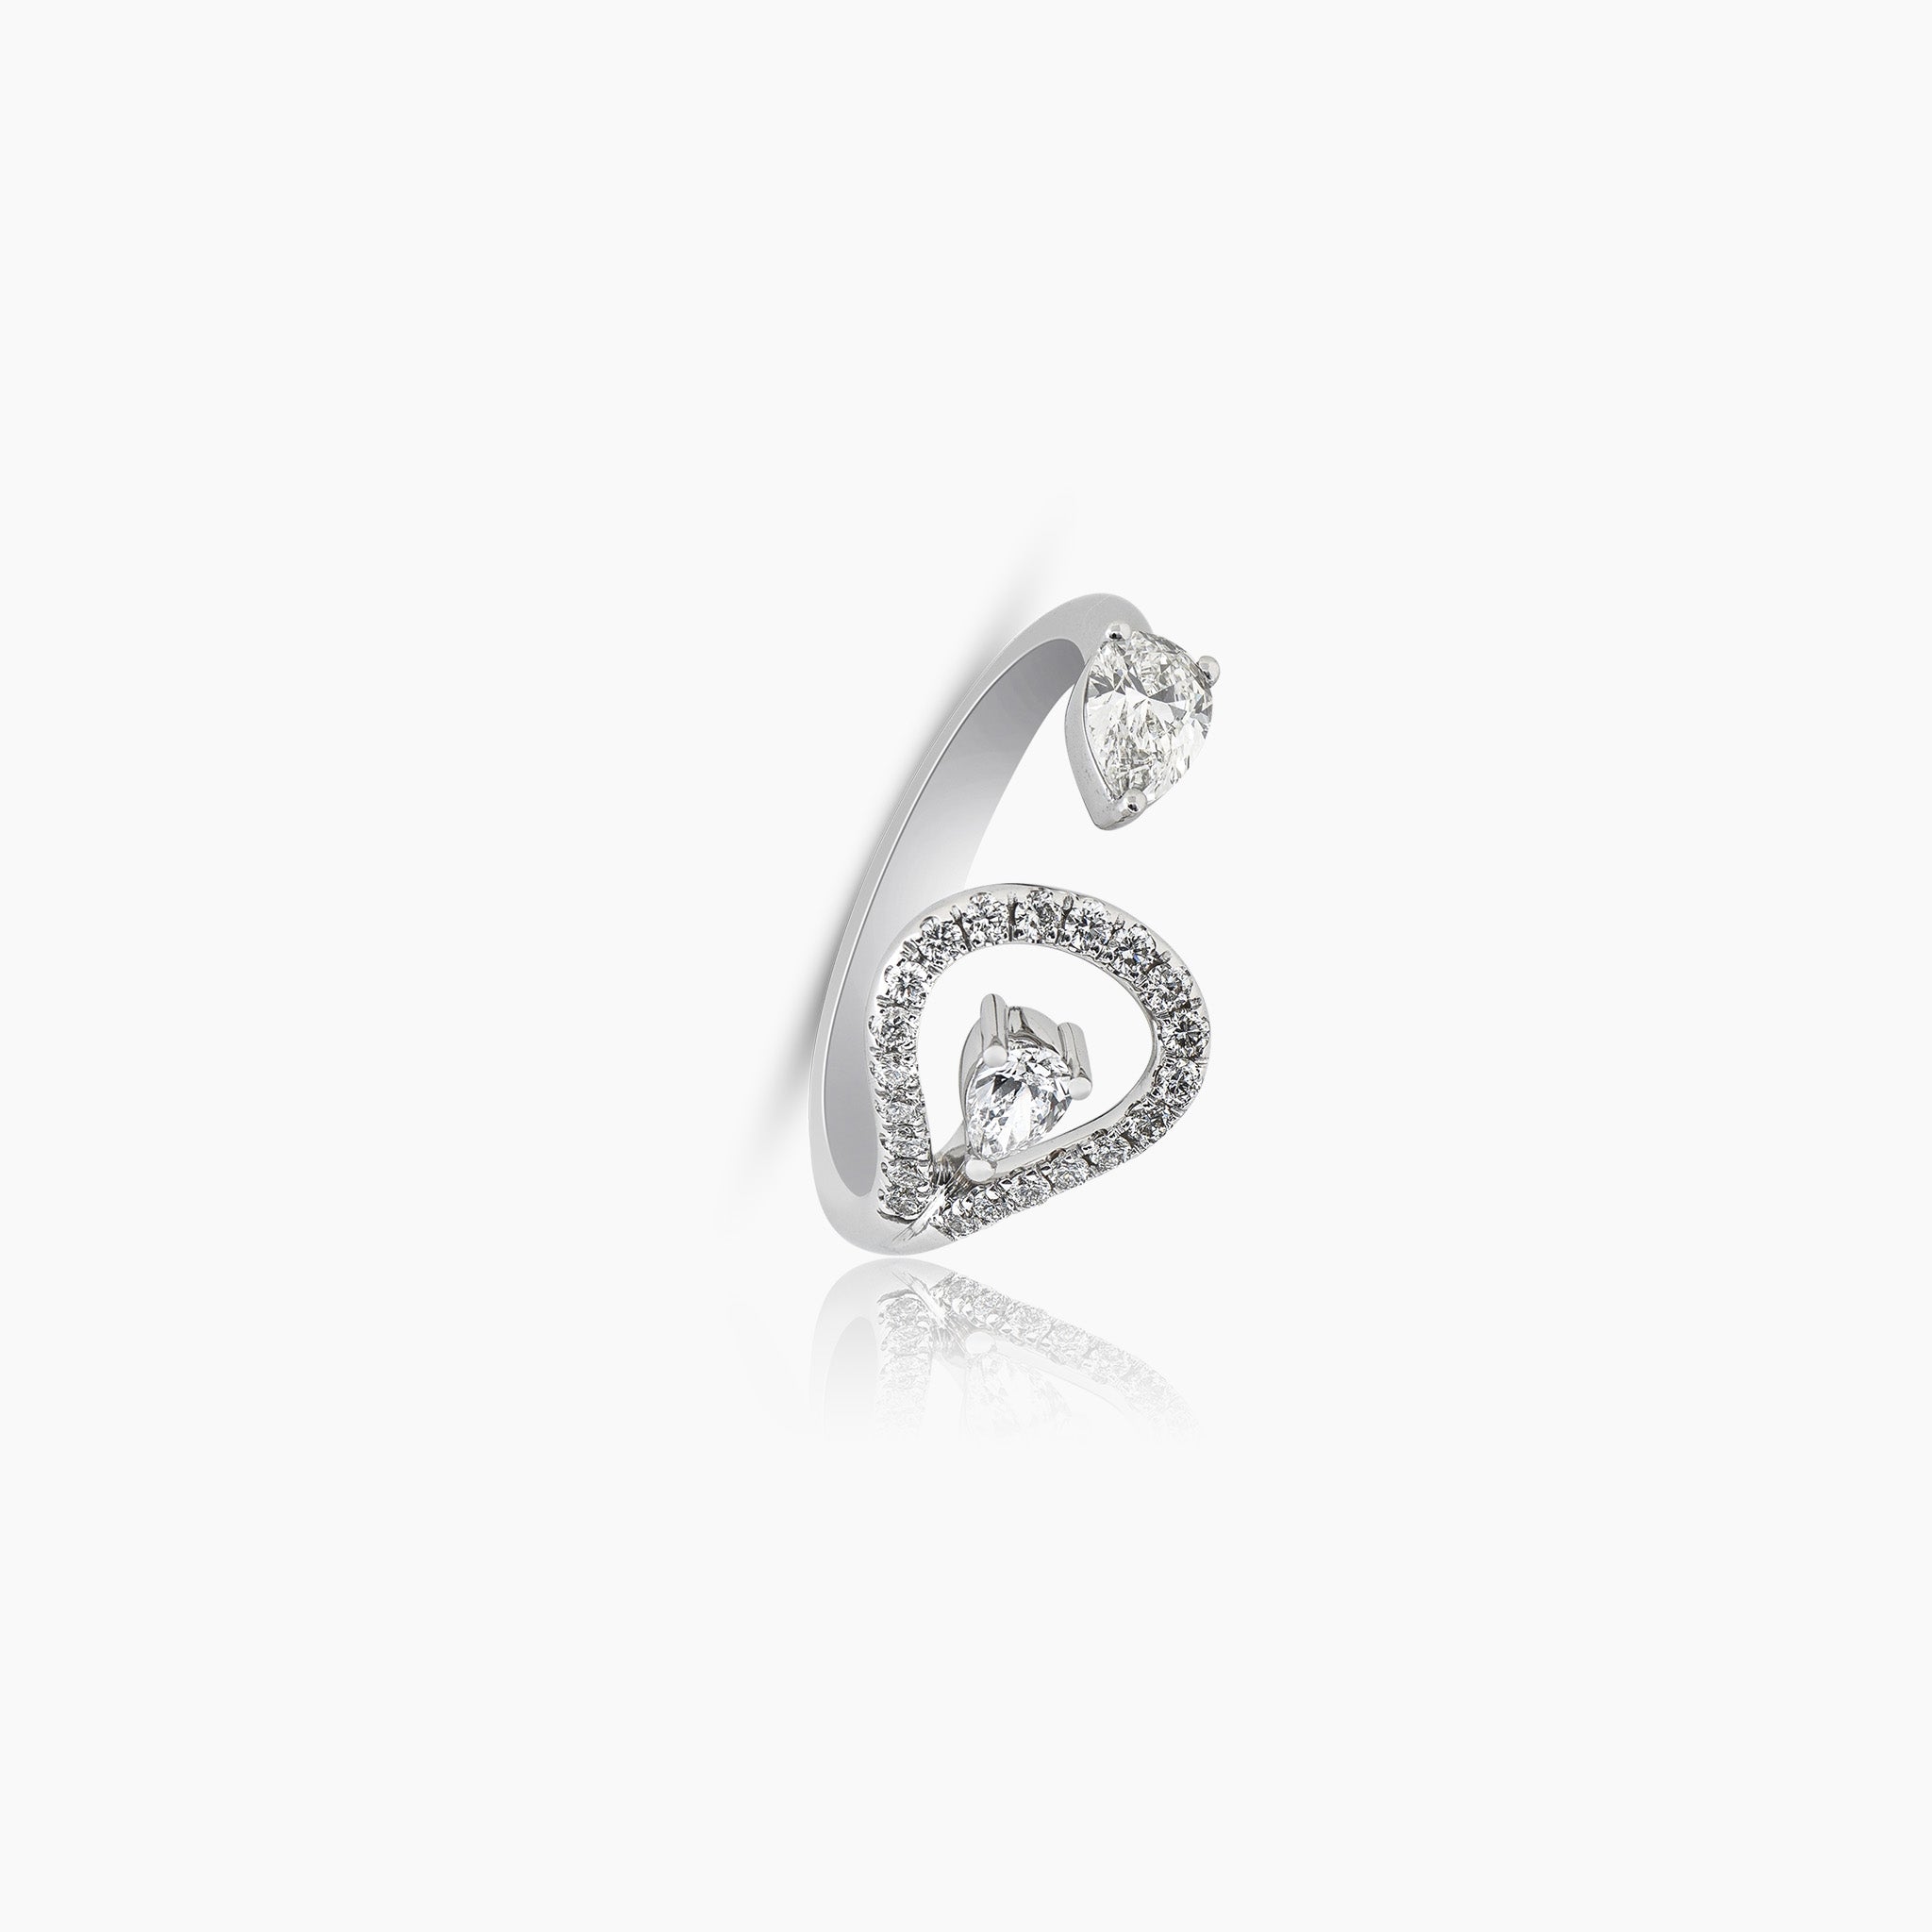 A stunning ring adorned with dazzling diamonds, set against an off-white background.